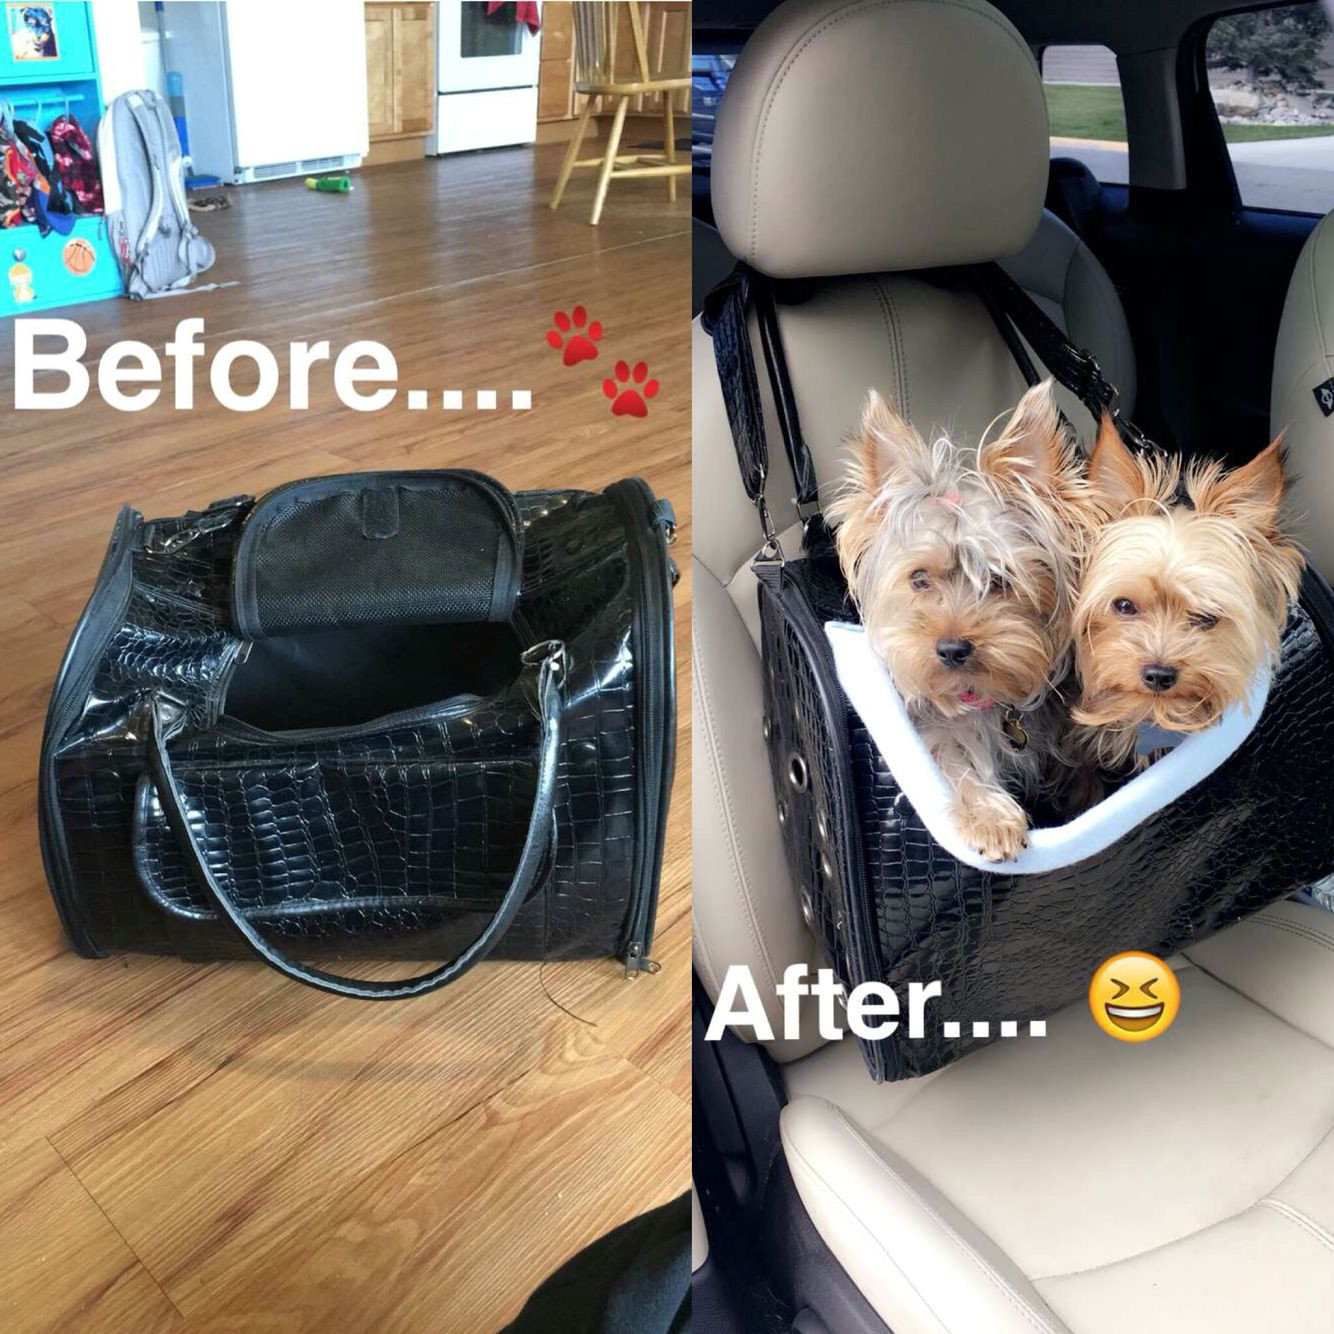 DIY Dog Booster Seat
 DIY dog car seat made from an old suitcase I got at